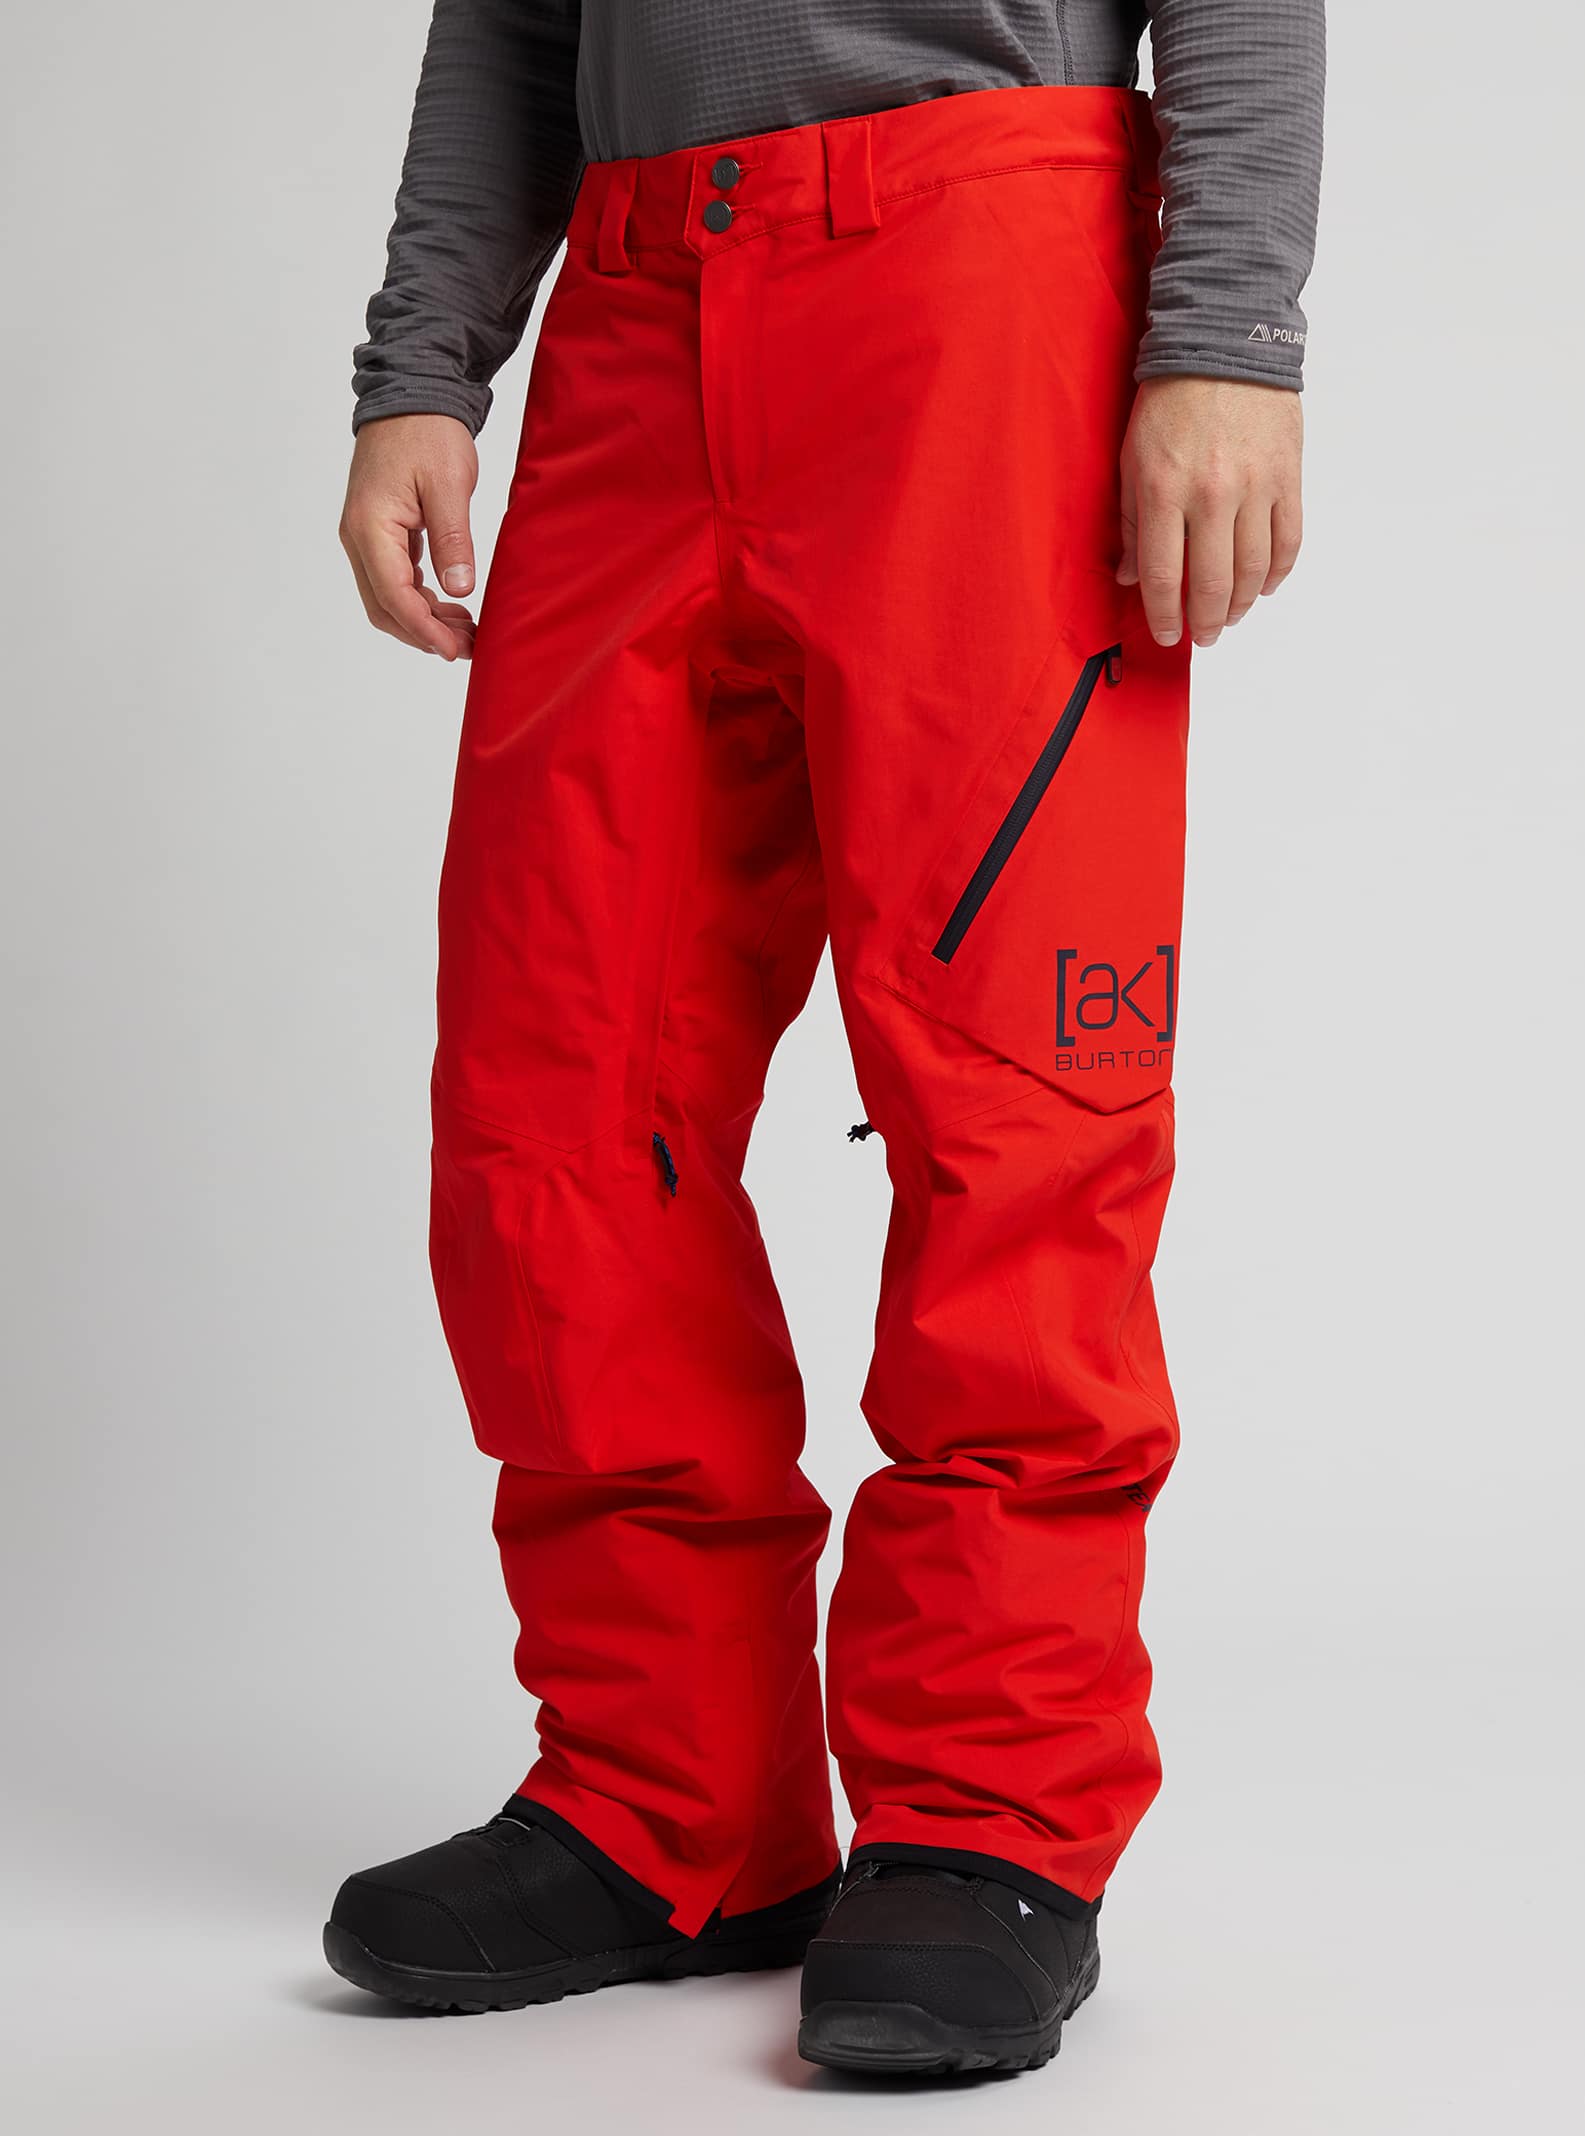 Outlet for Snowboard Gear & Clothing | Burton Snowboards ES